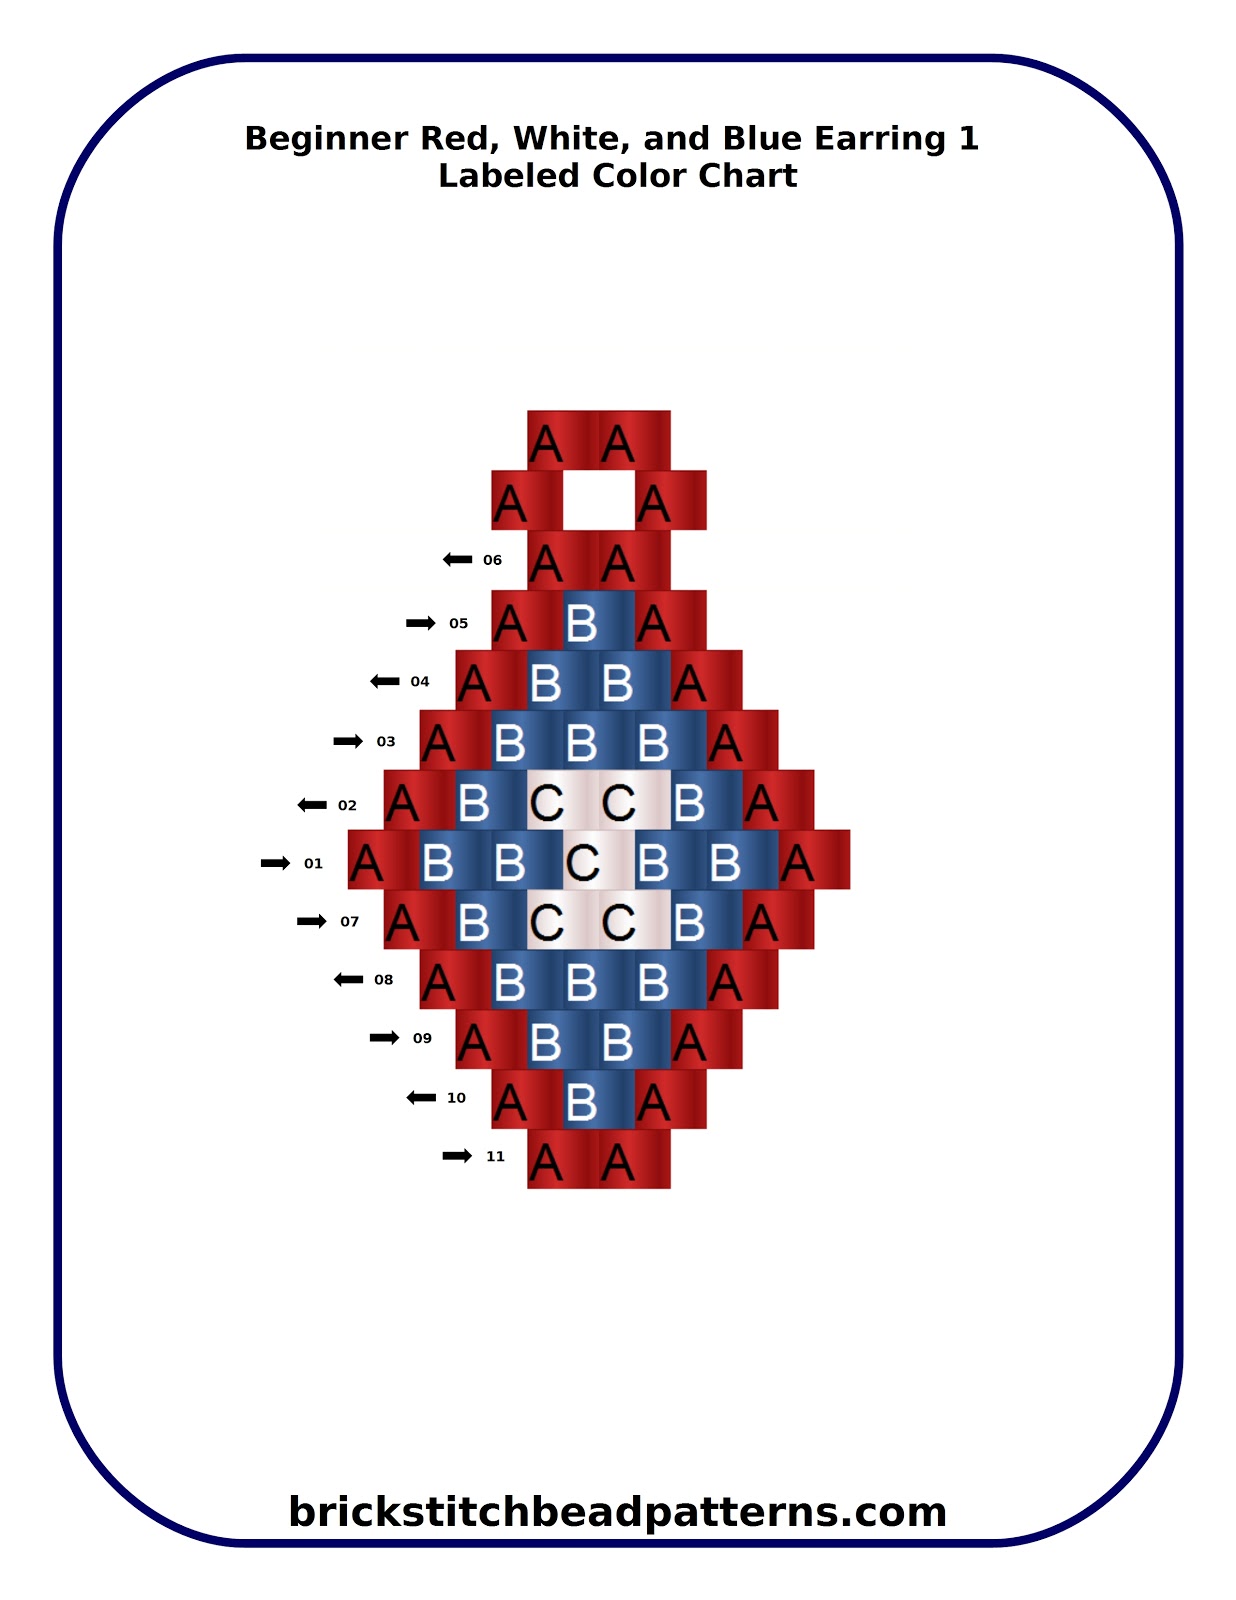 Download Brick Stitch Bead Patterns Journal: Beginner Red, White, and Blue Patriotic Earring 1 Free Brick ...